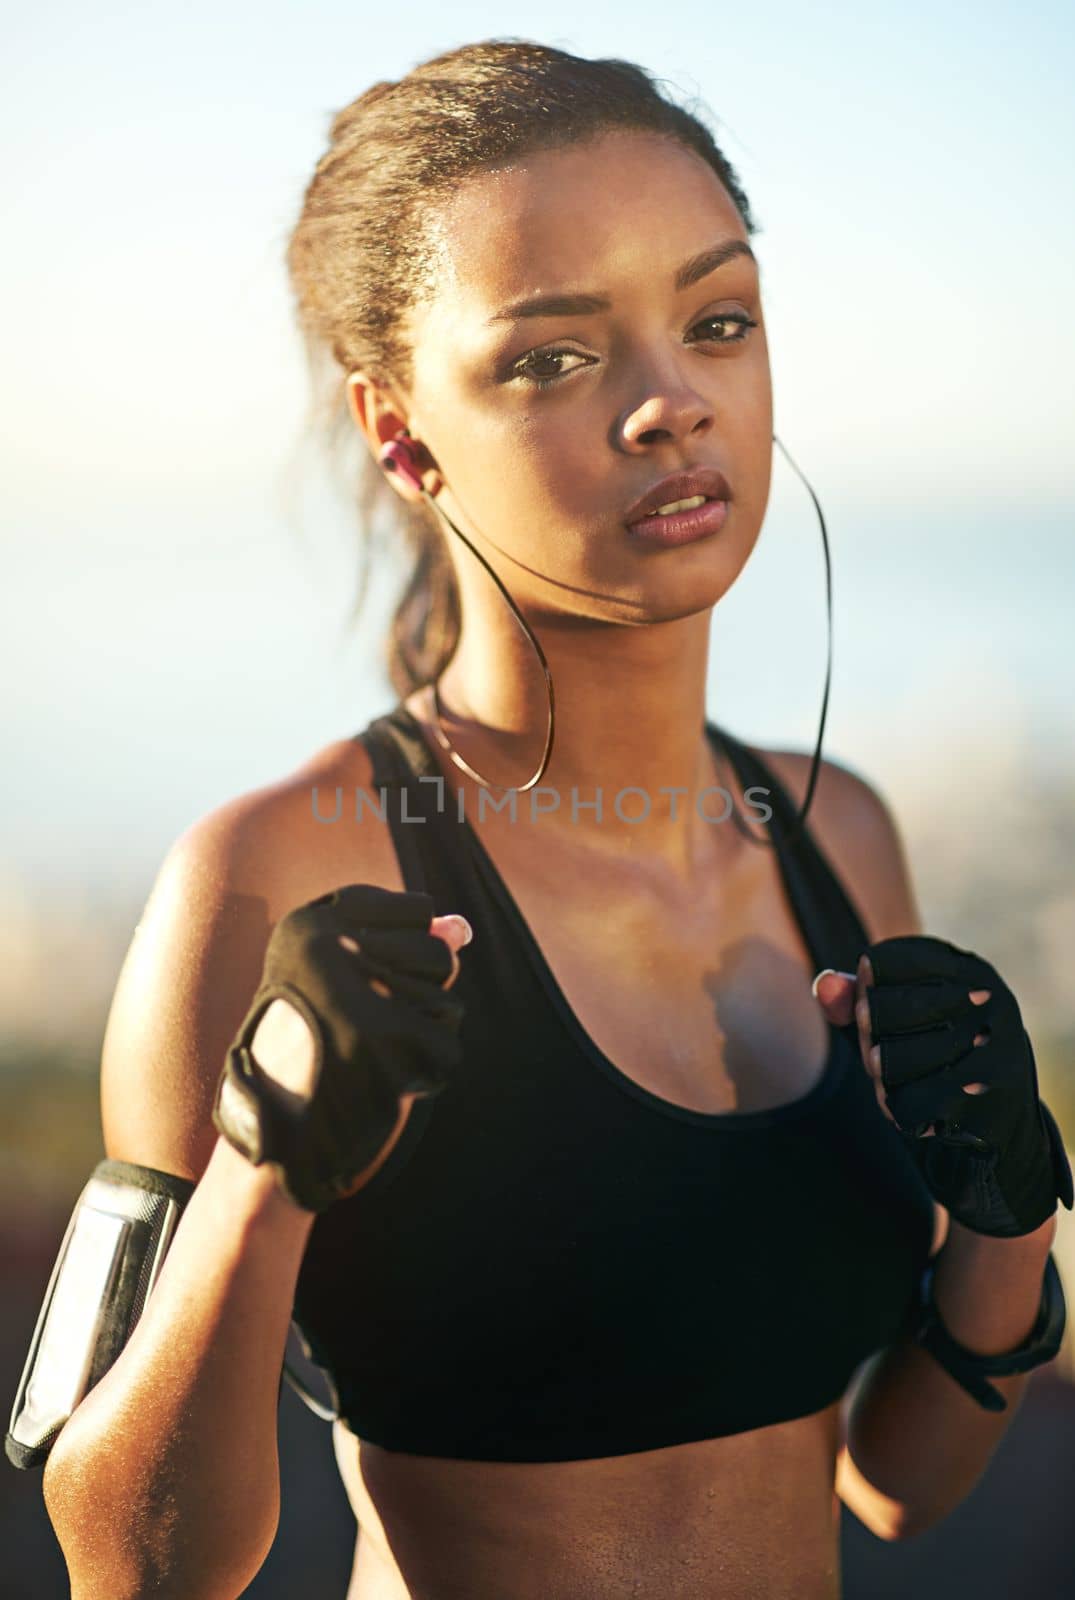 Im ready to rumble. a young woman exercising outdoors